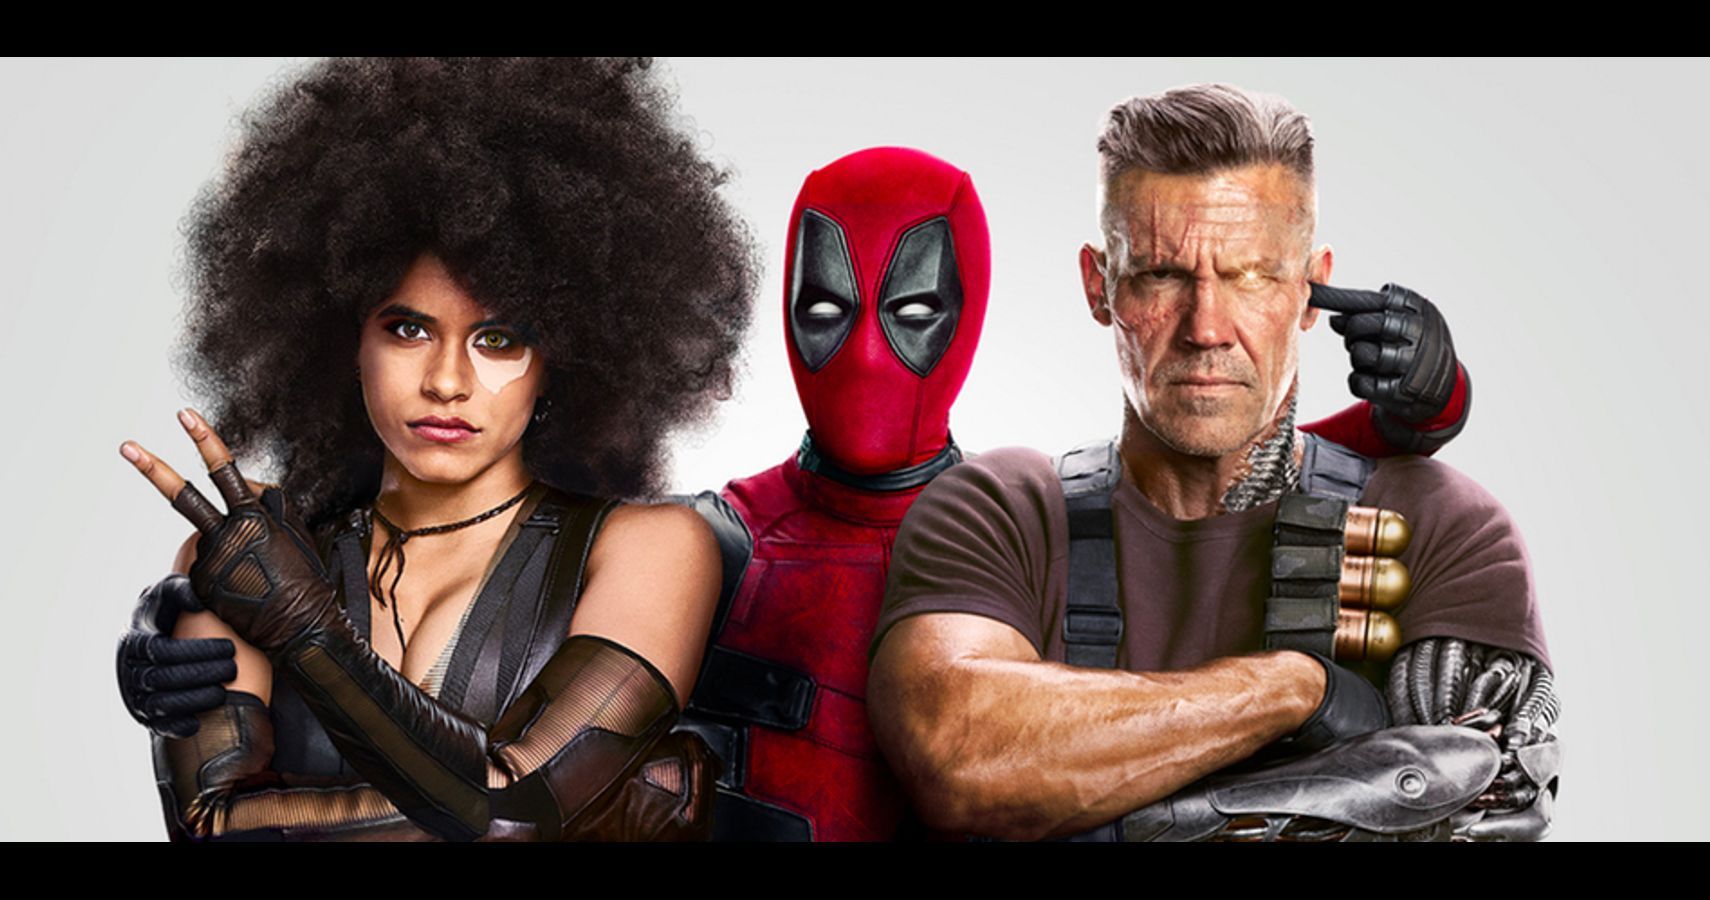 10 Characters We Hope To See In The Marvels Deadpool 3 Movie